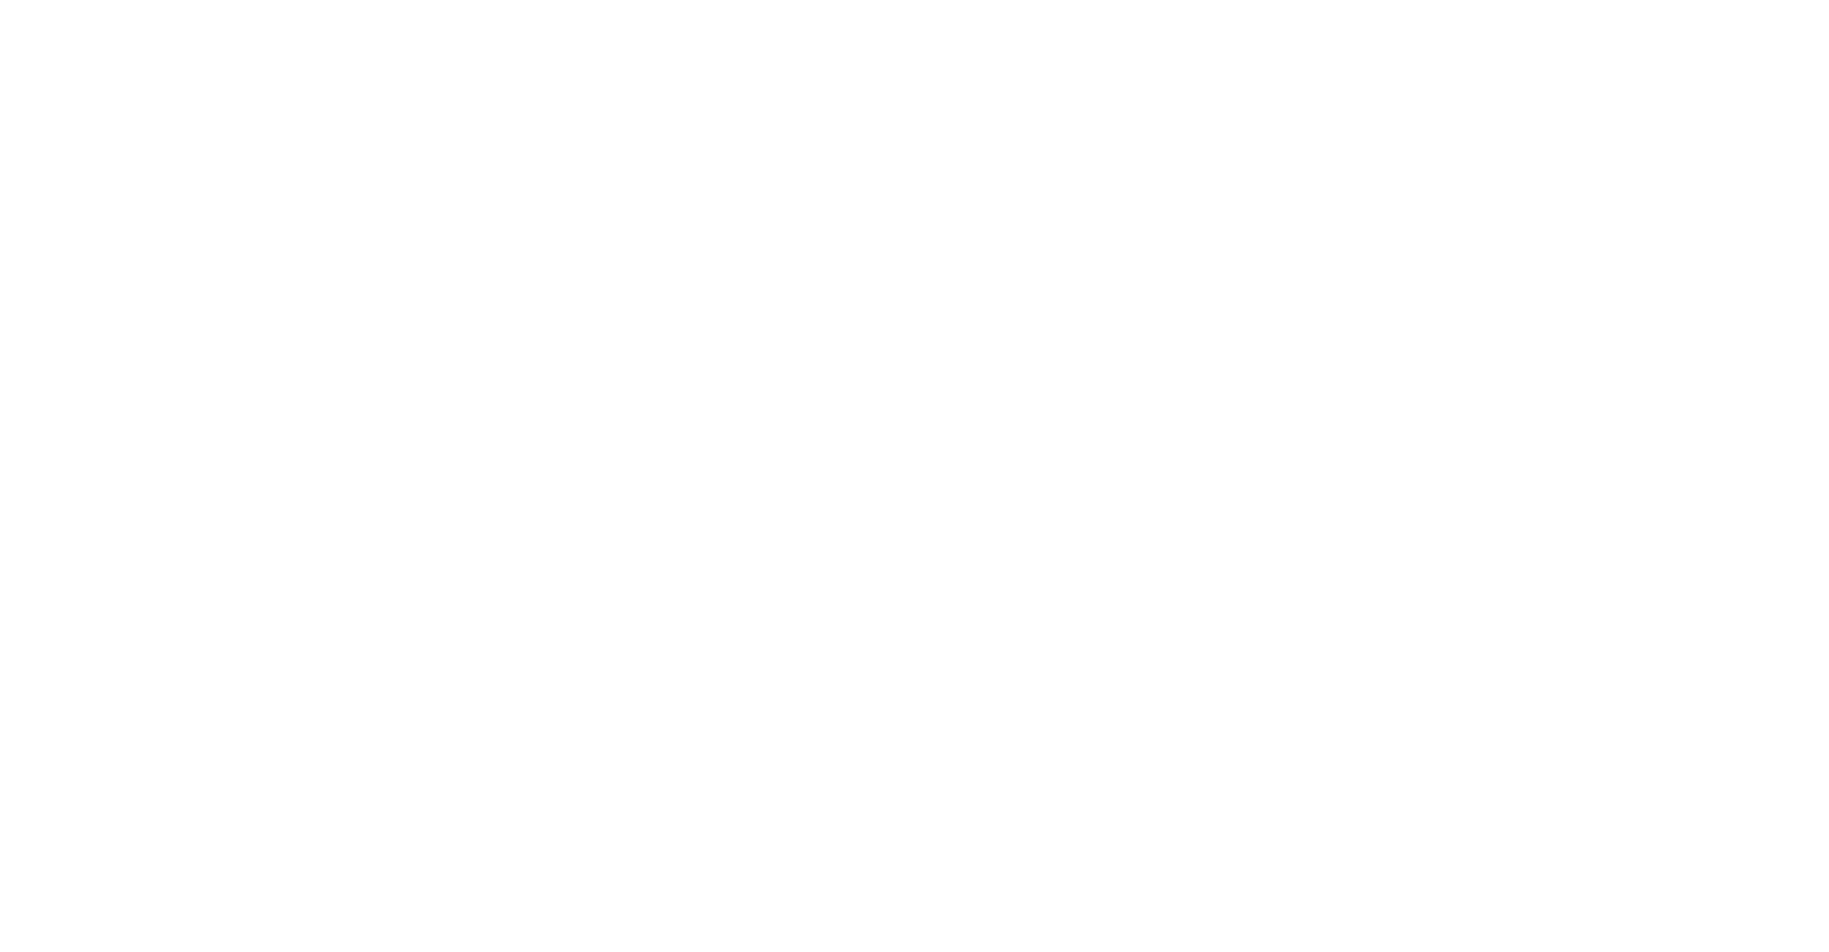 Department for Levelling Up Housing and Communities